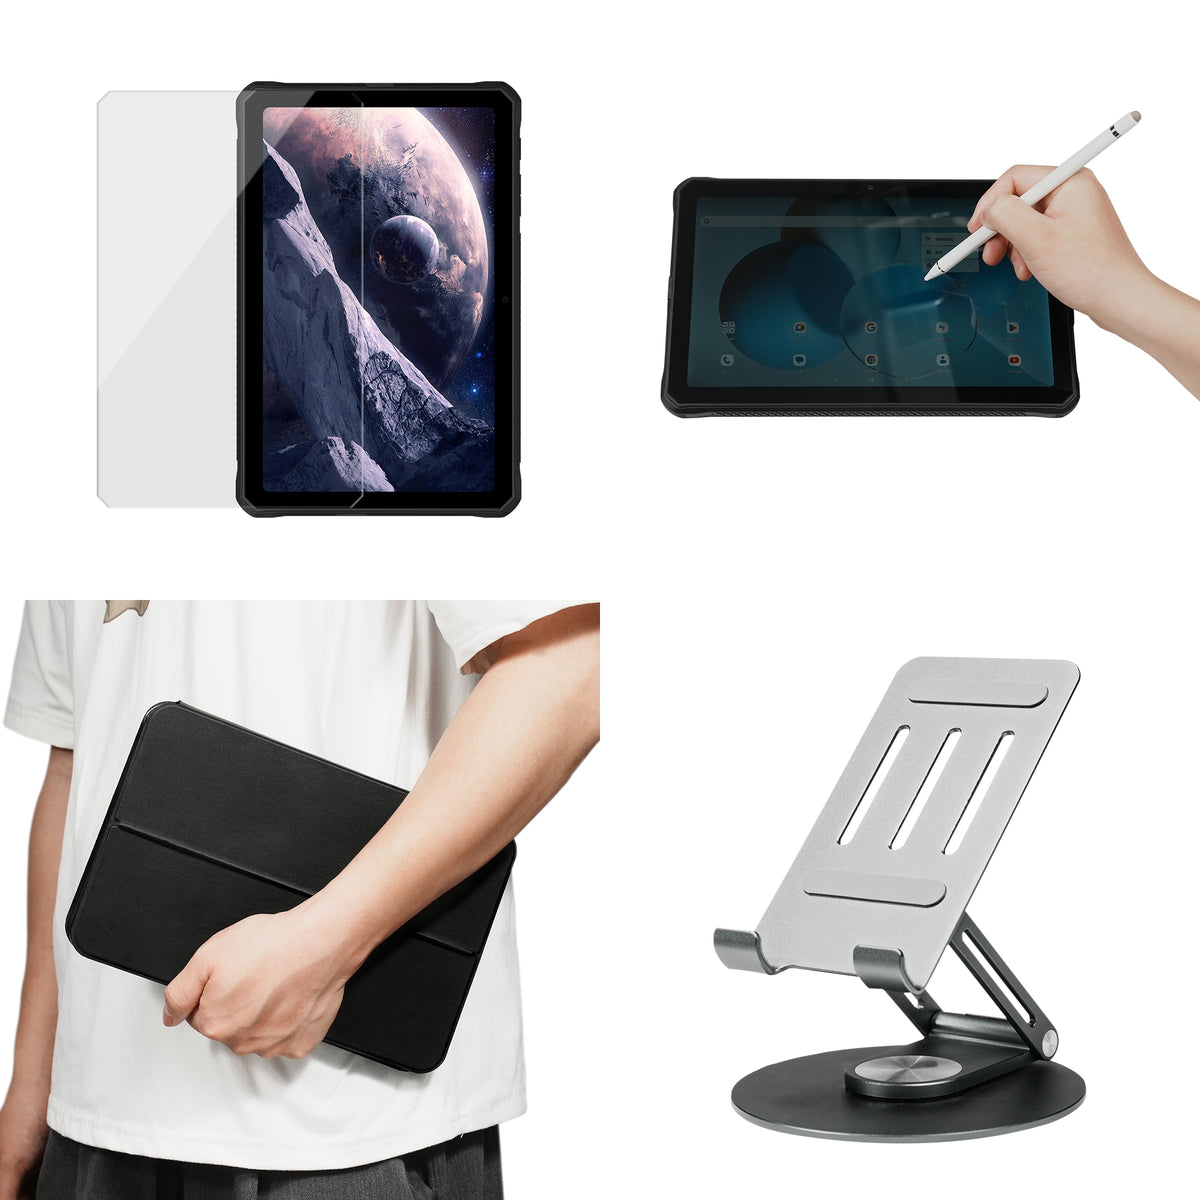 R10 Accessory Combo Kit (Tempered Film, Stylus, Keyboard, Stand)